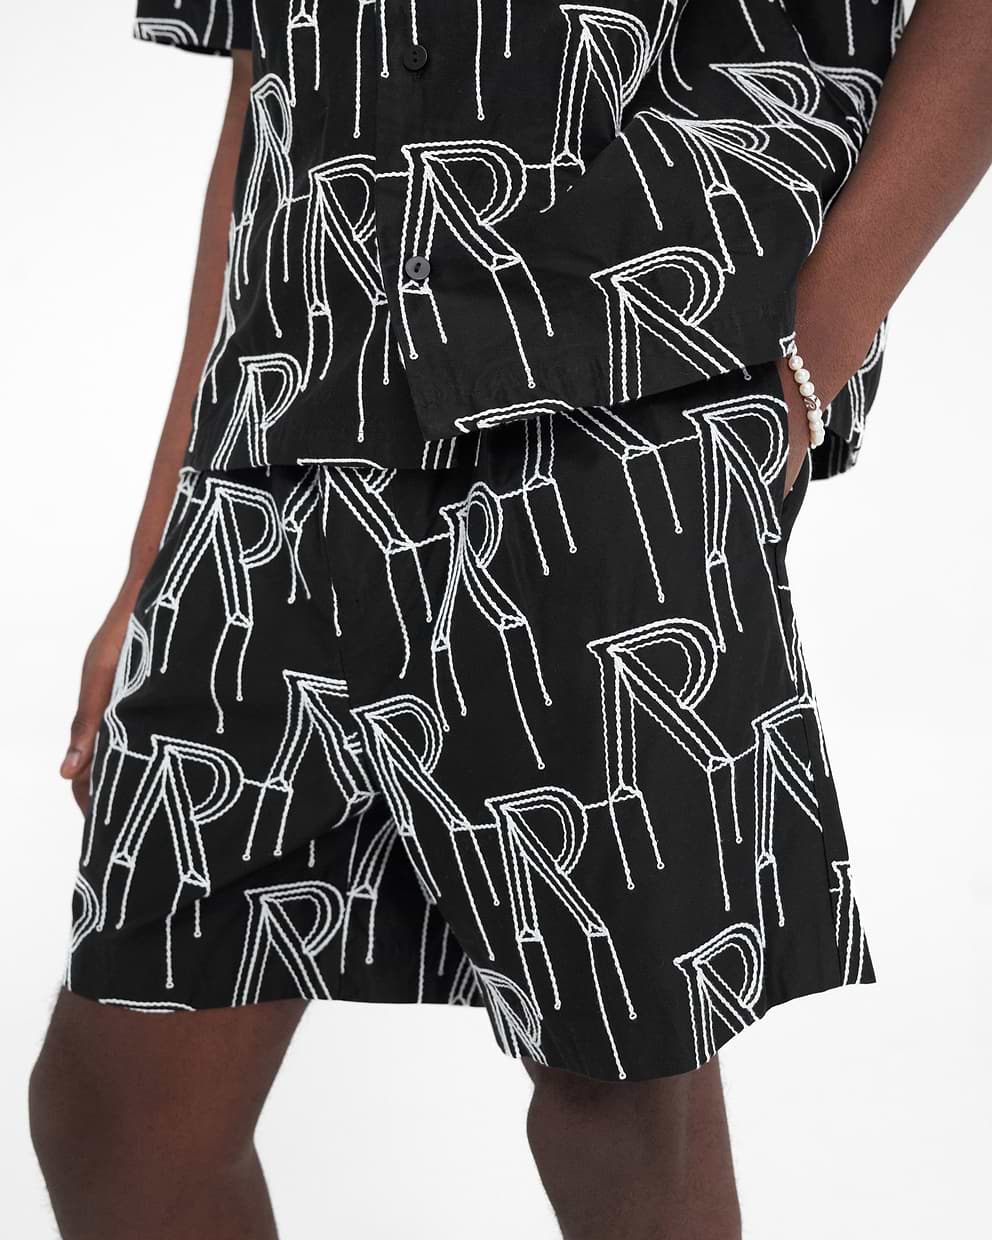 Embroidered Initial Tailored Short - Black